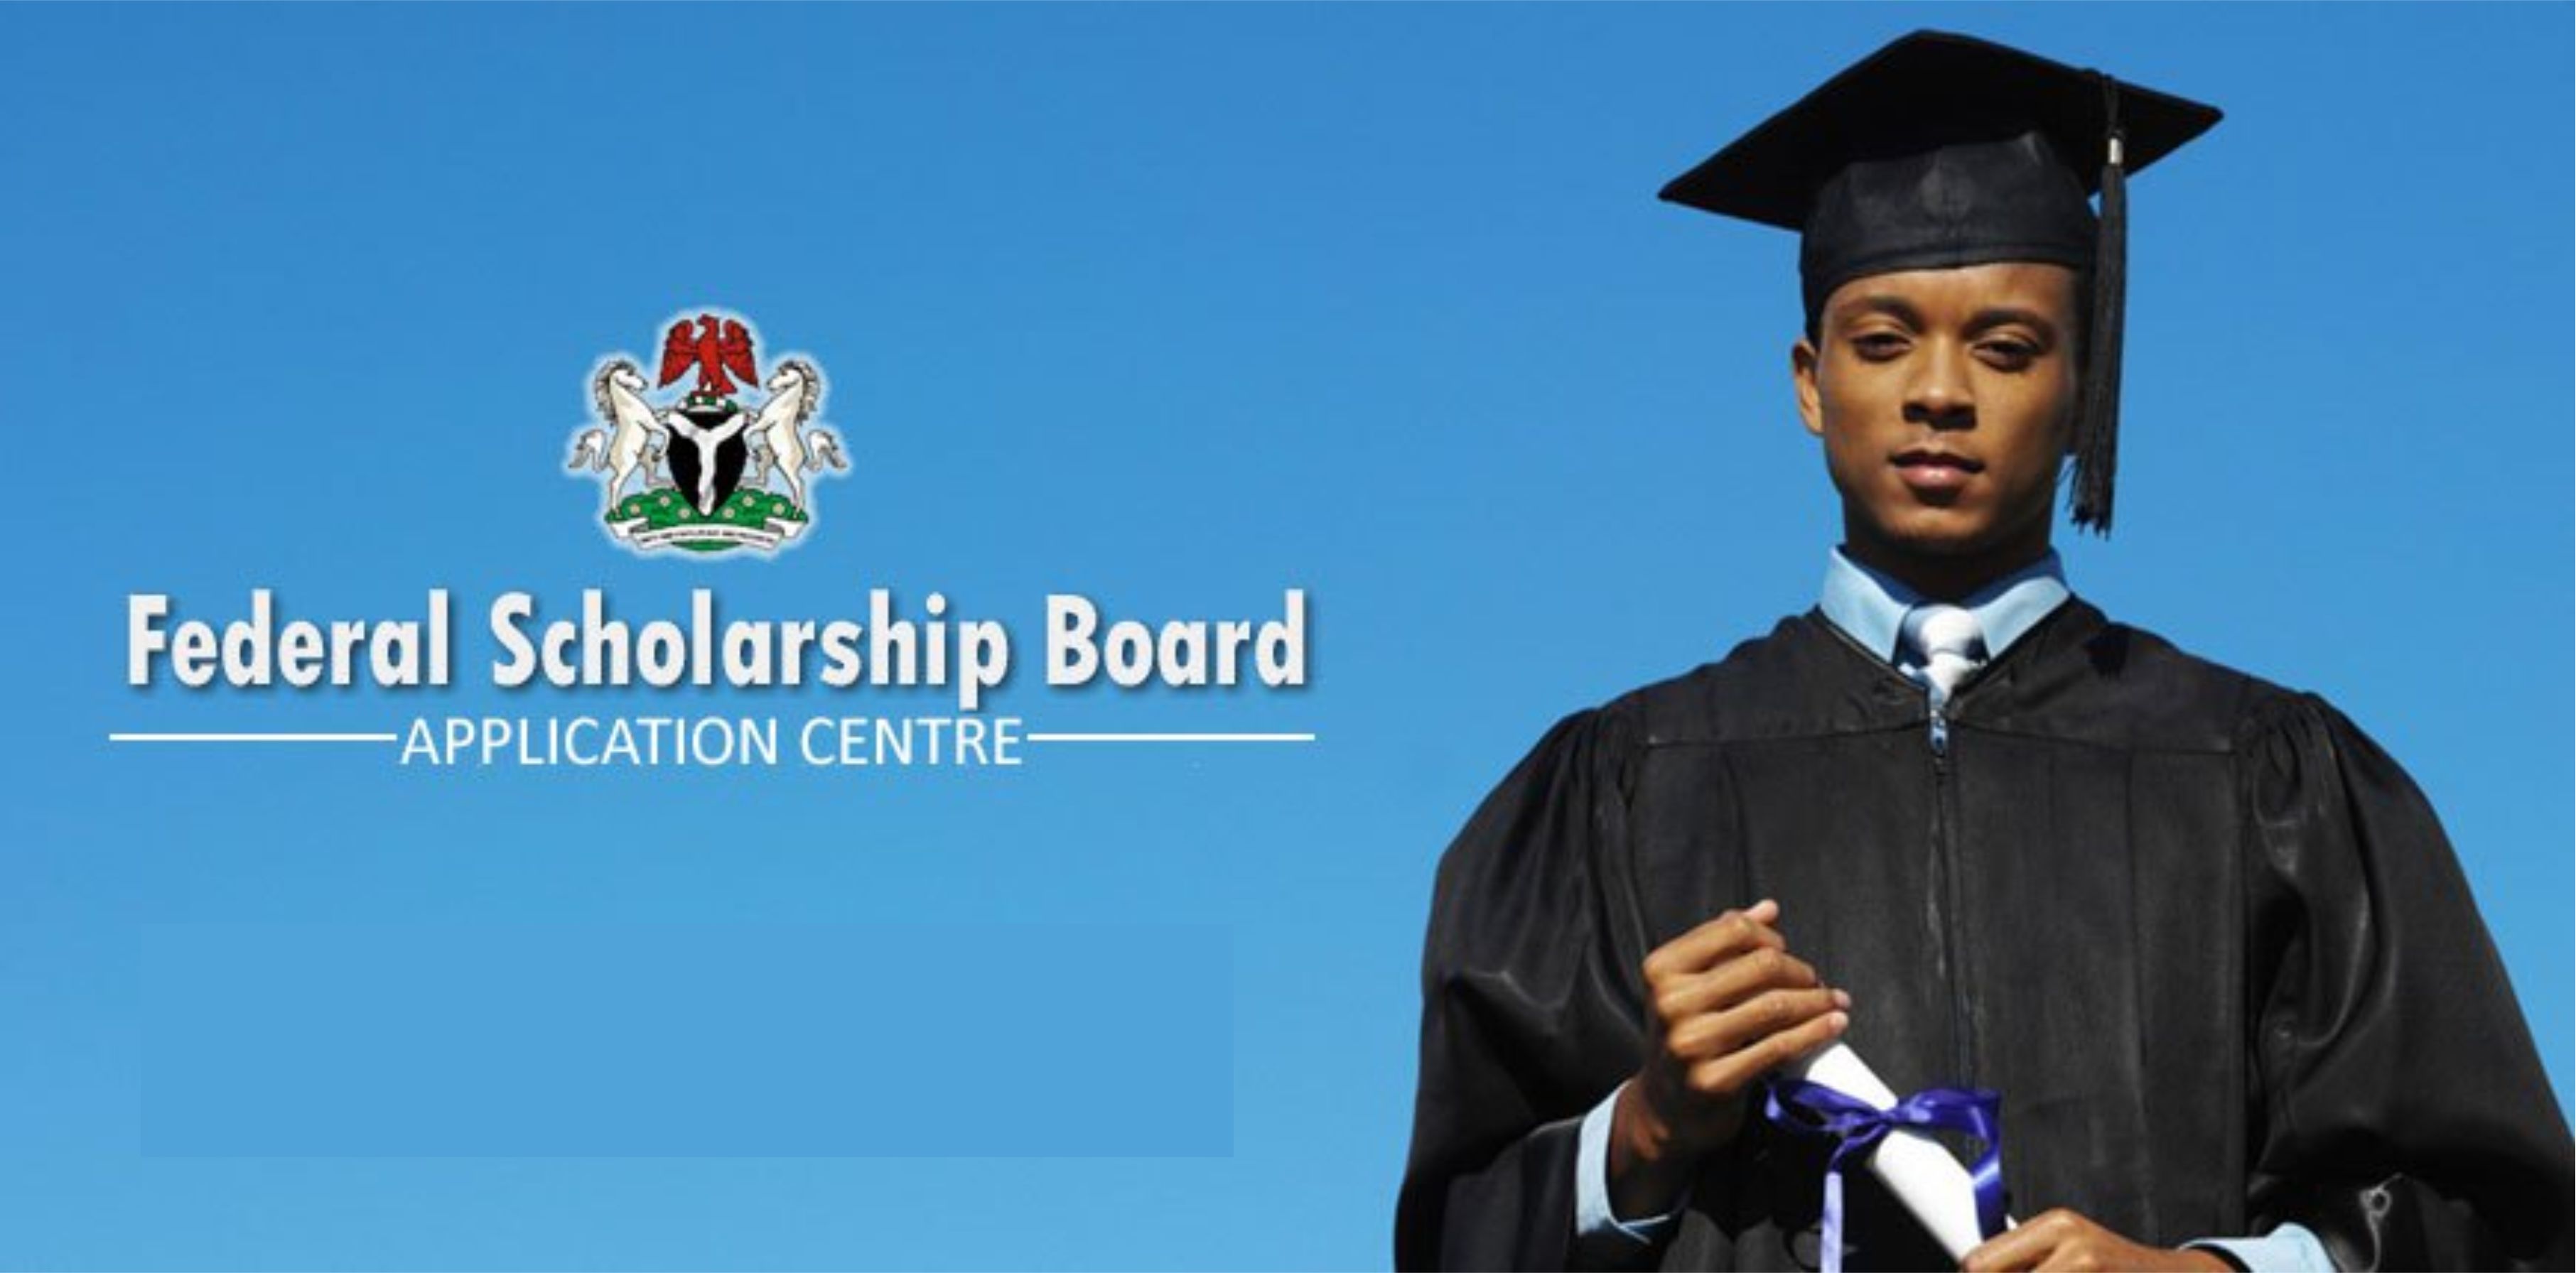 SOURCES OF FINANCIAL AIDS FOR NIGERIANS TO STUDY ABROAD